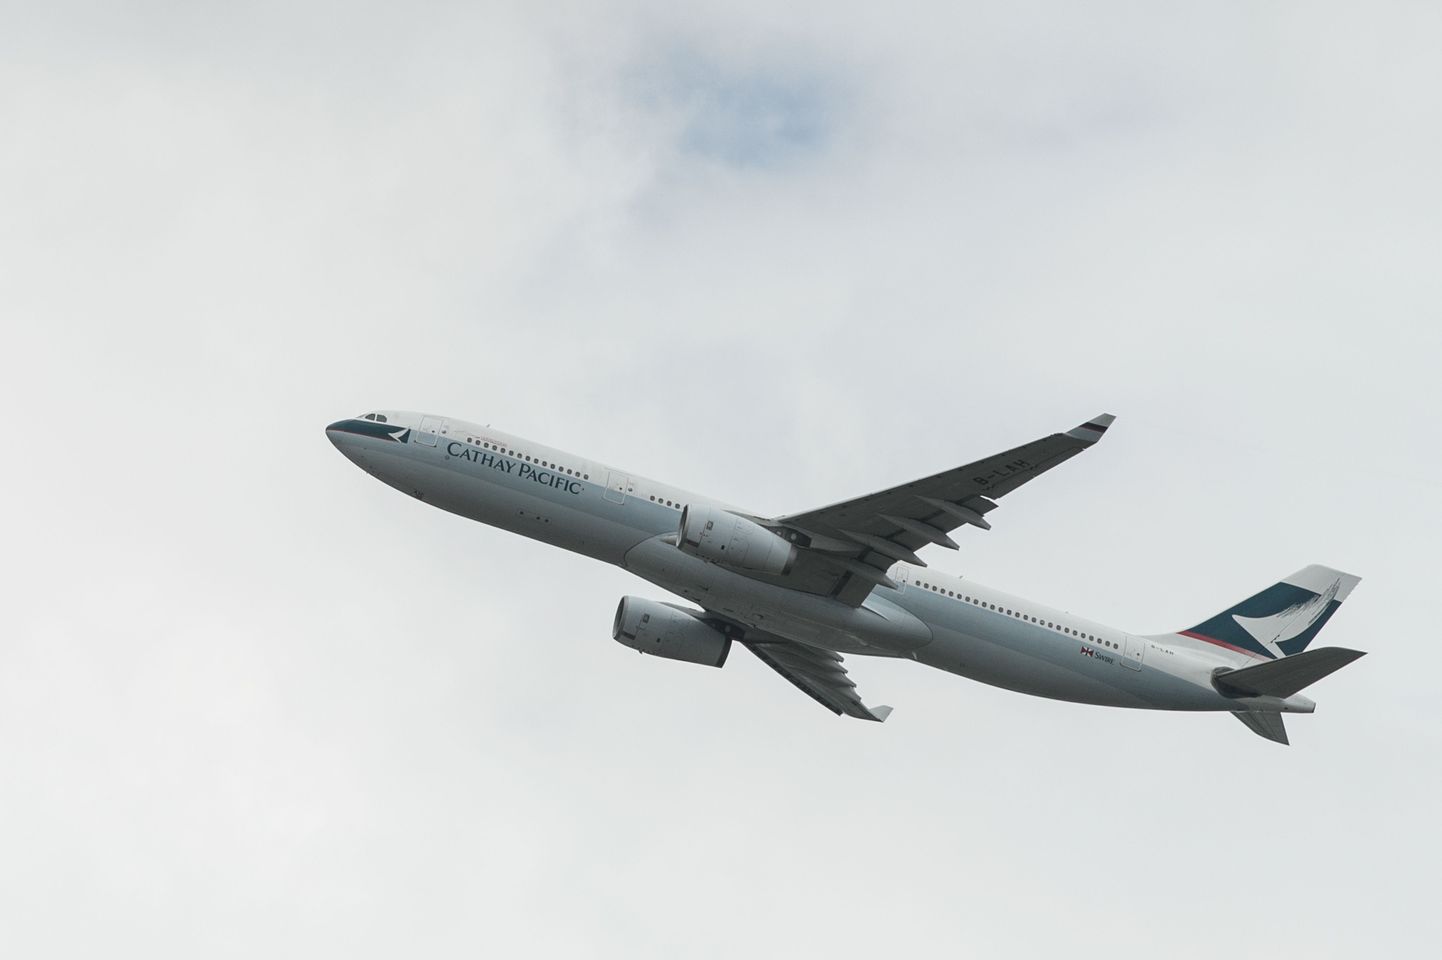 Cathay Pacific lennuk.